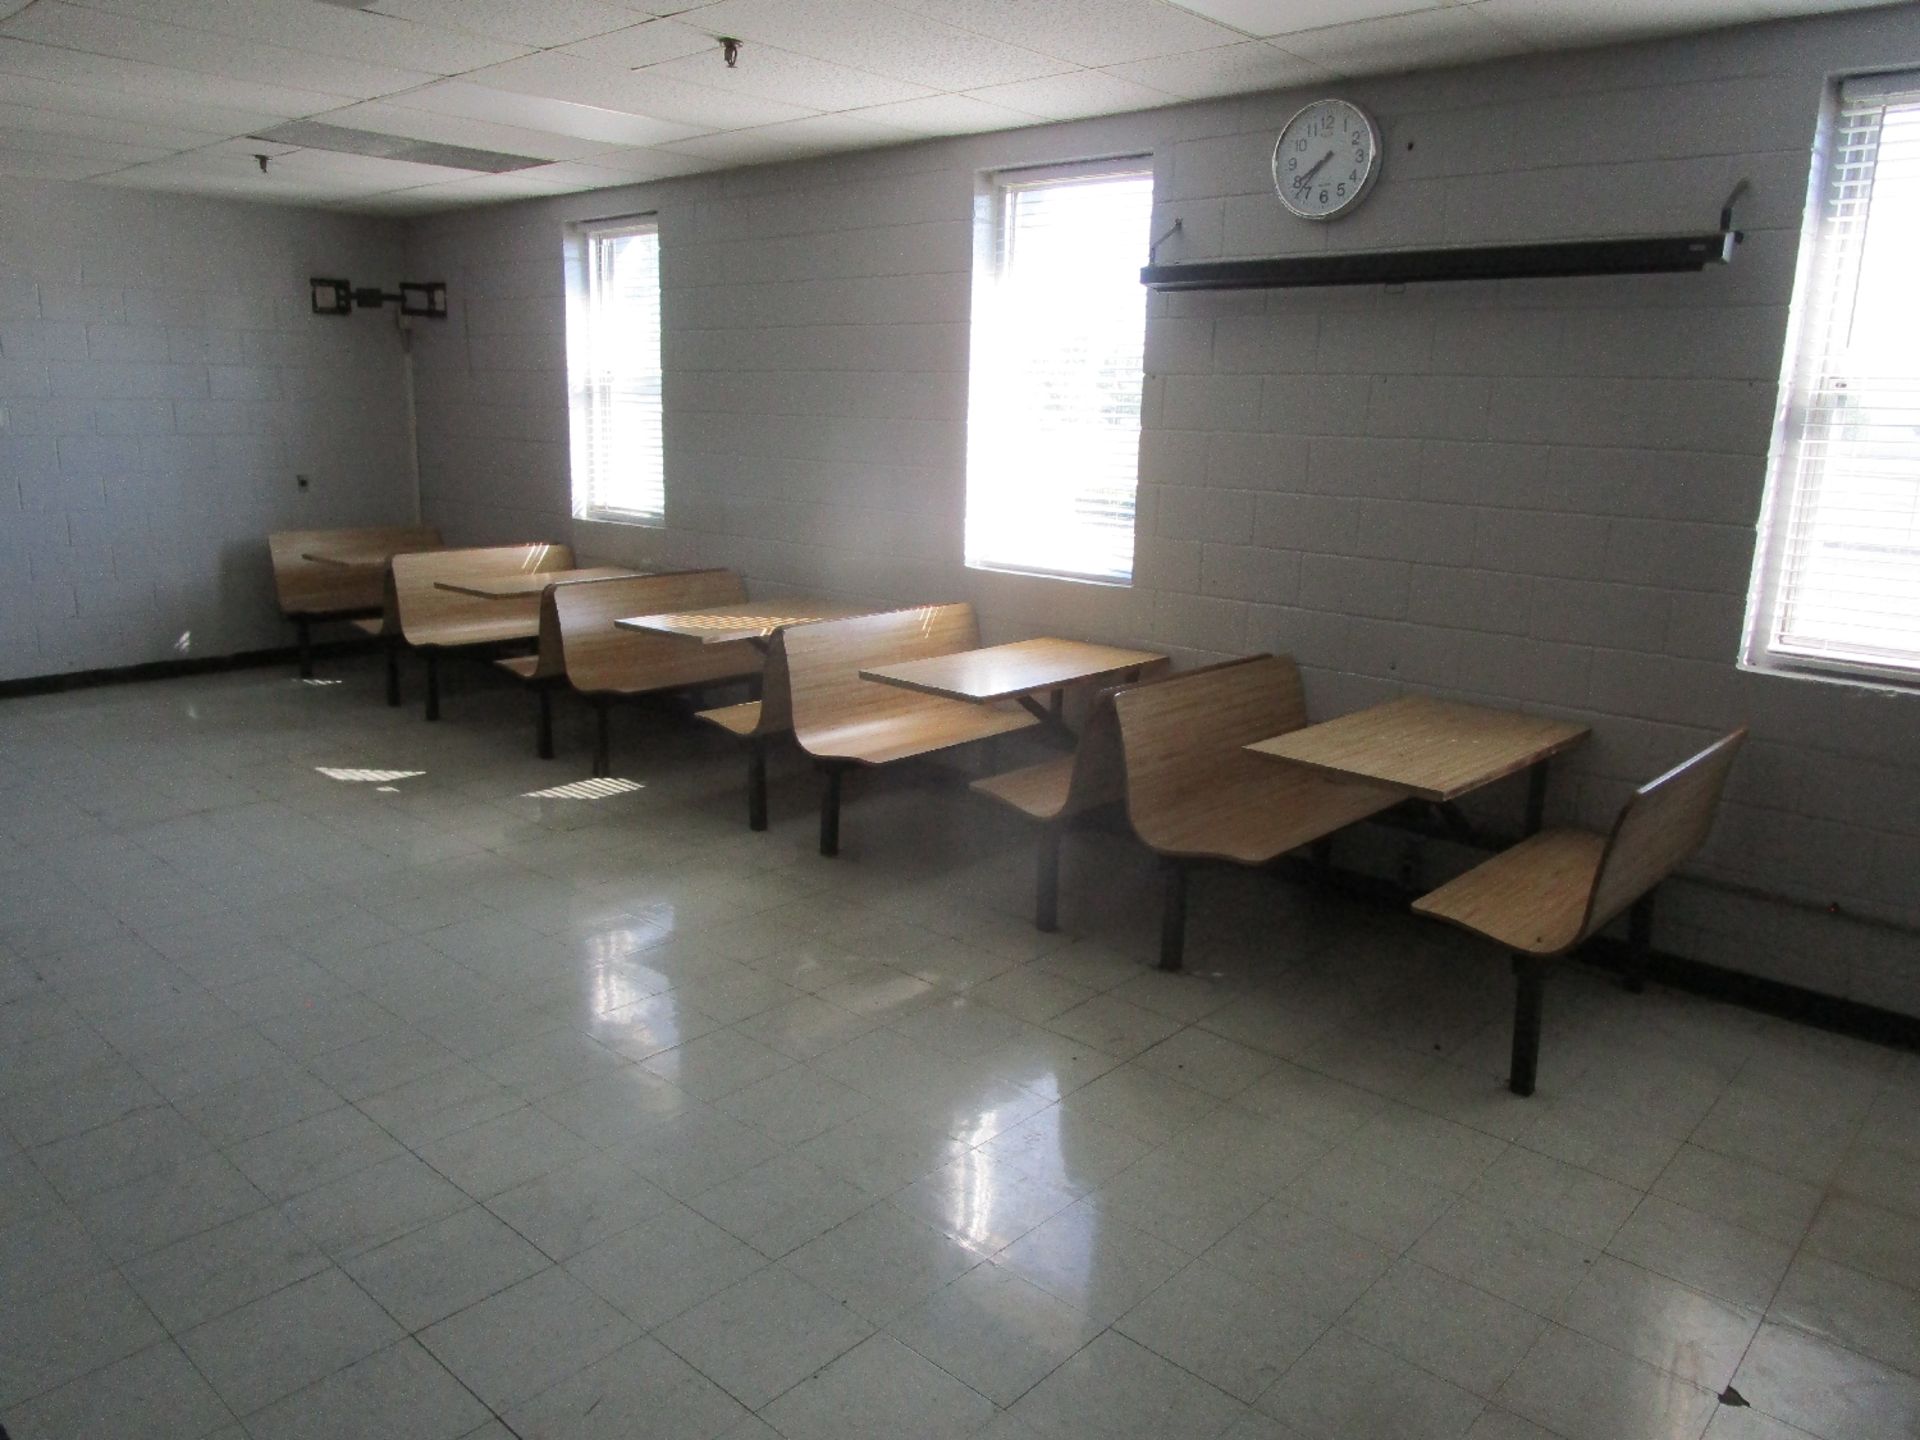 Cafeteria Furniture Including Booths & Tables - Image 2 of 2